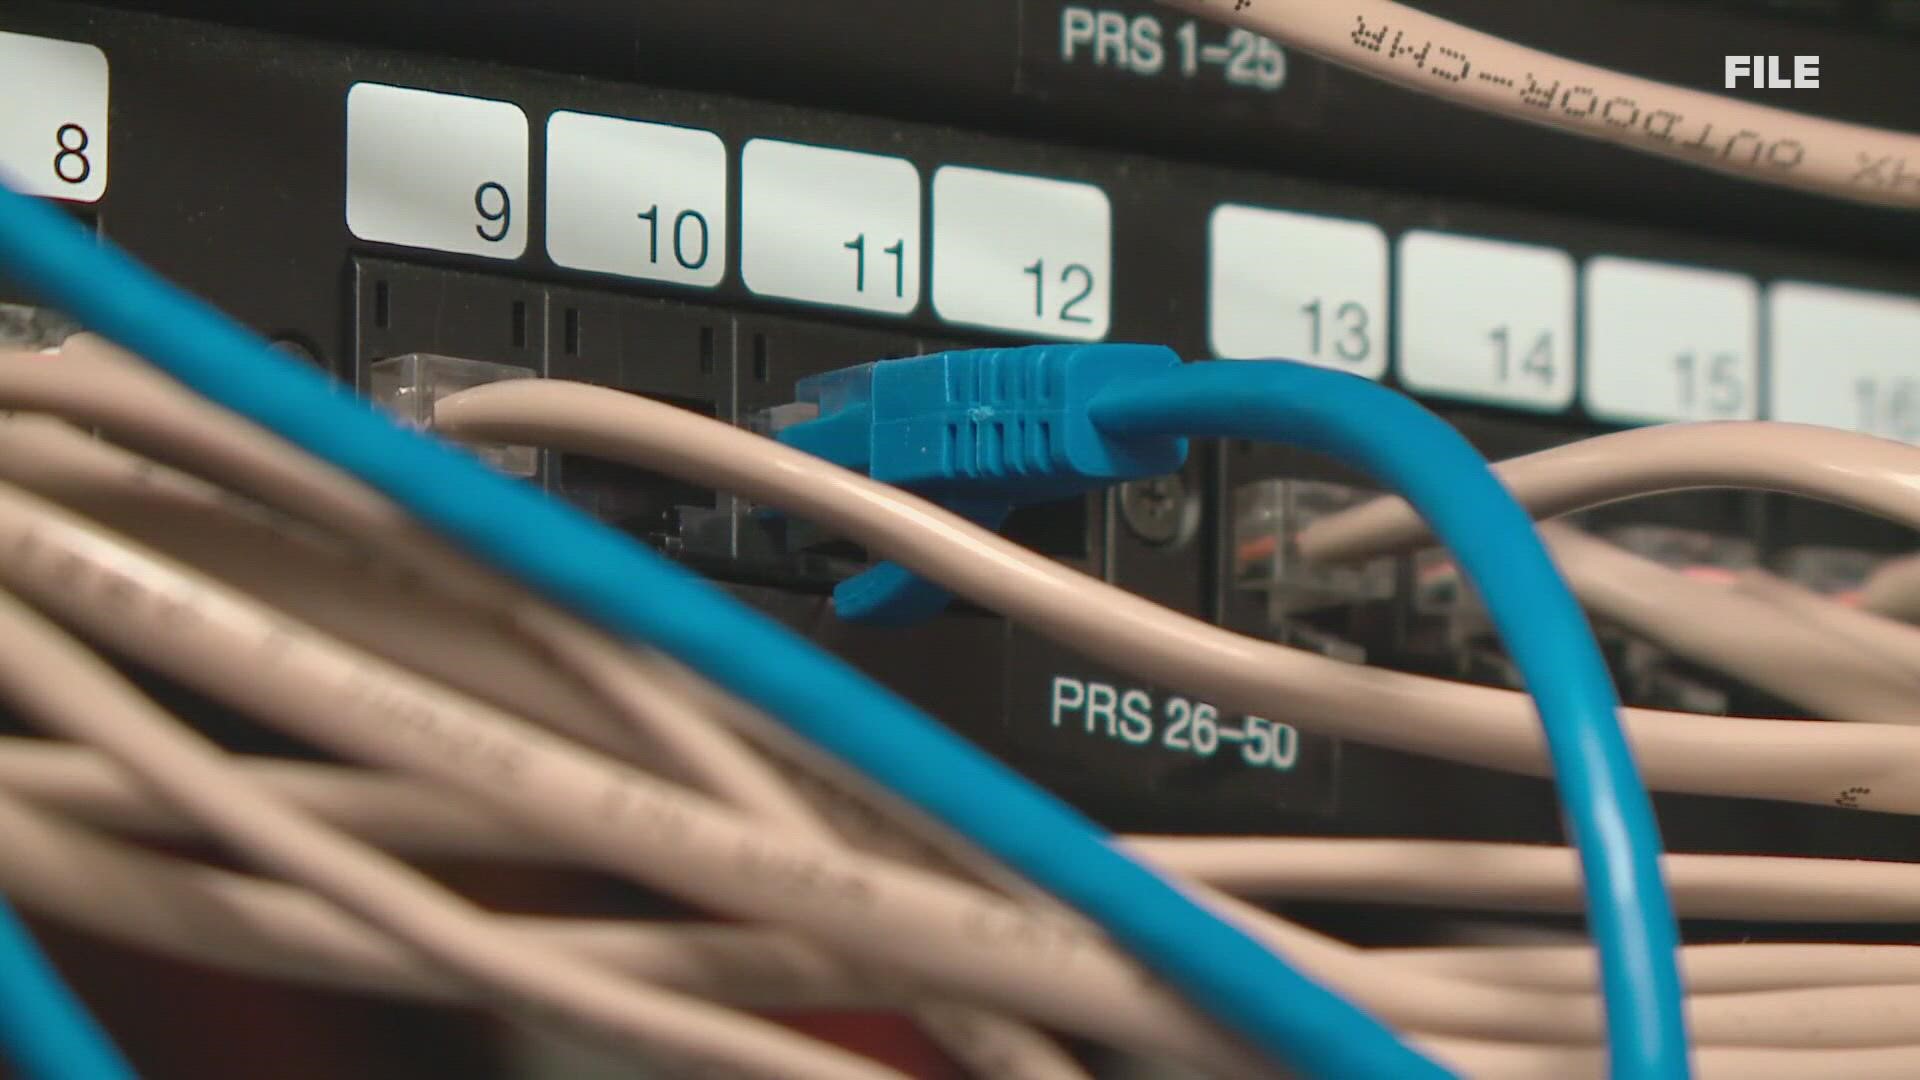 About 23 percent of households in The County are not connected to advanced broadband. Officials there say they plan to use government funding to help close that gap.